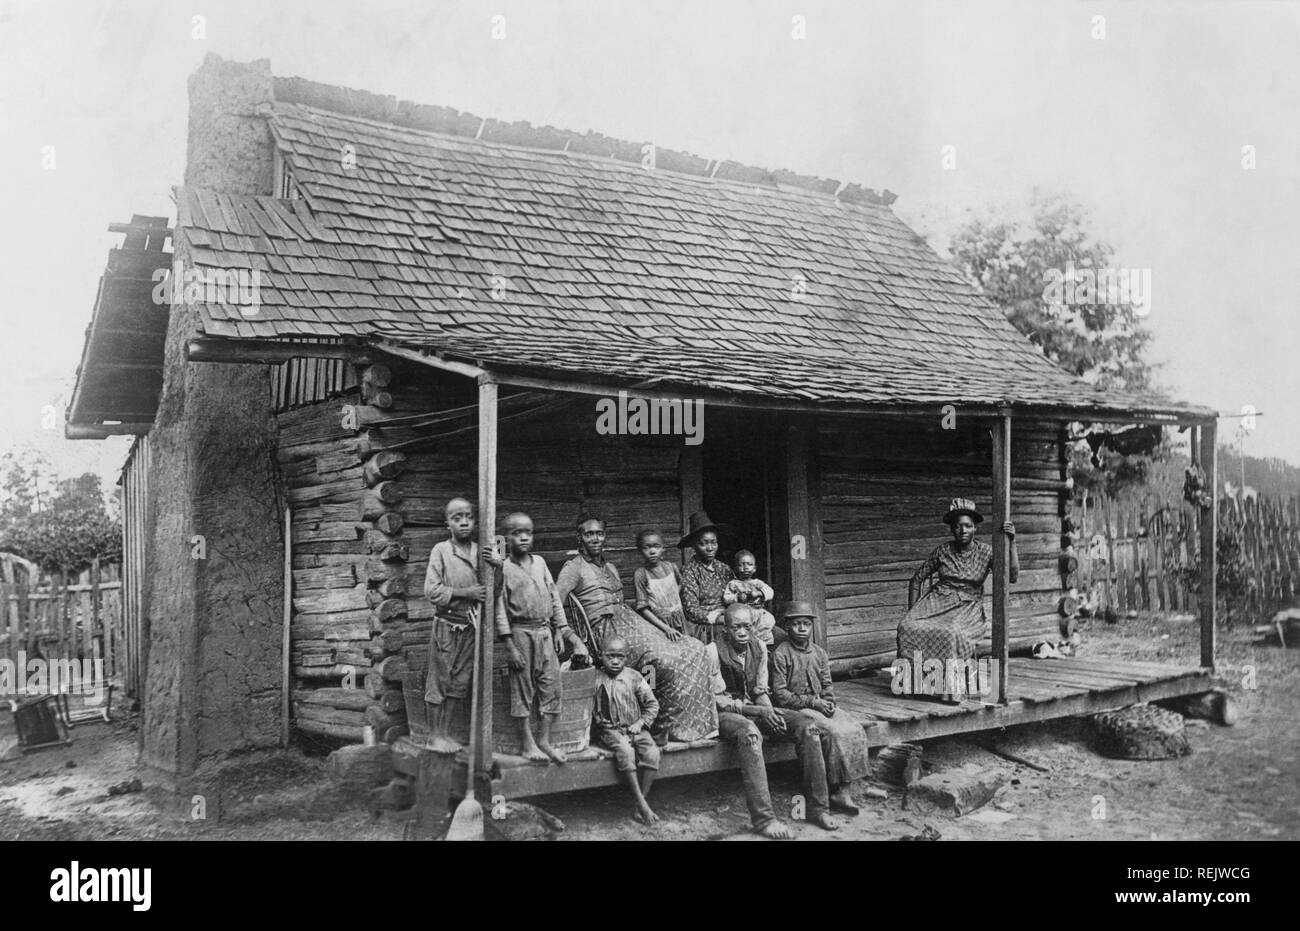 Slave Cabin, Barbour County near Eufaula, Alabama, USA, from Federal Writer's Project, 'Born in Slavery: Slave Narratives', United States Work Projects Administration, 1936 Stock Photo